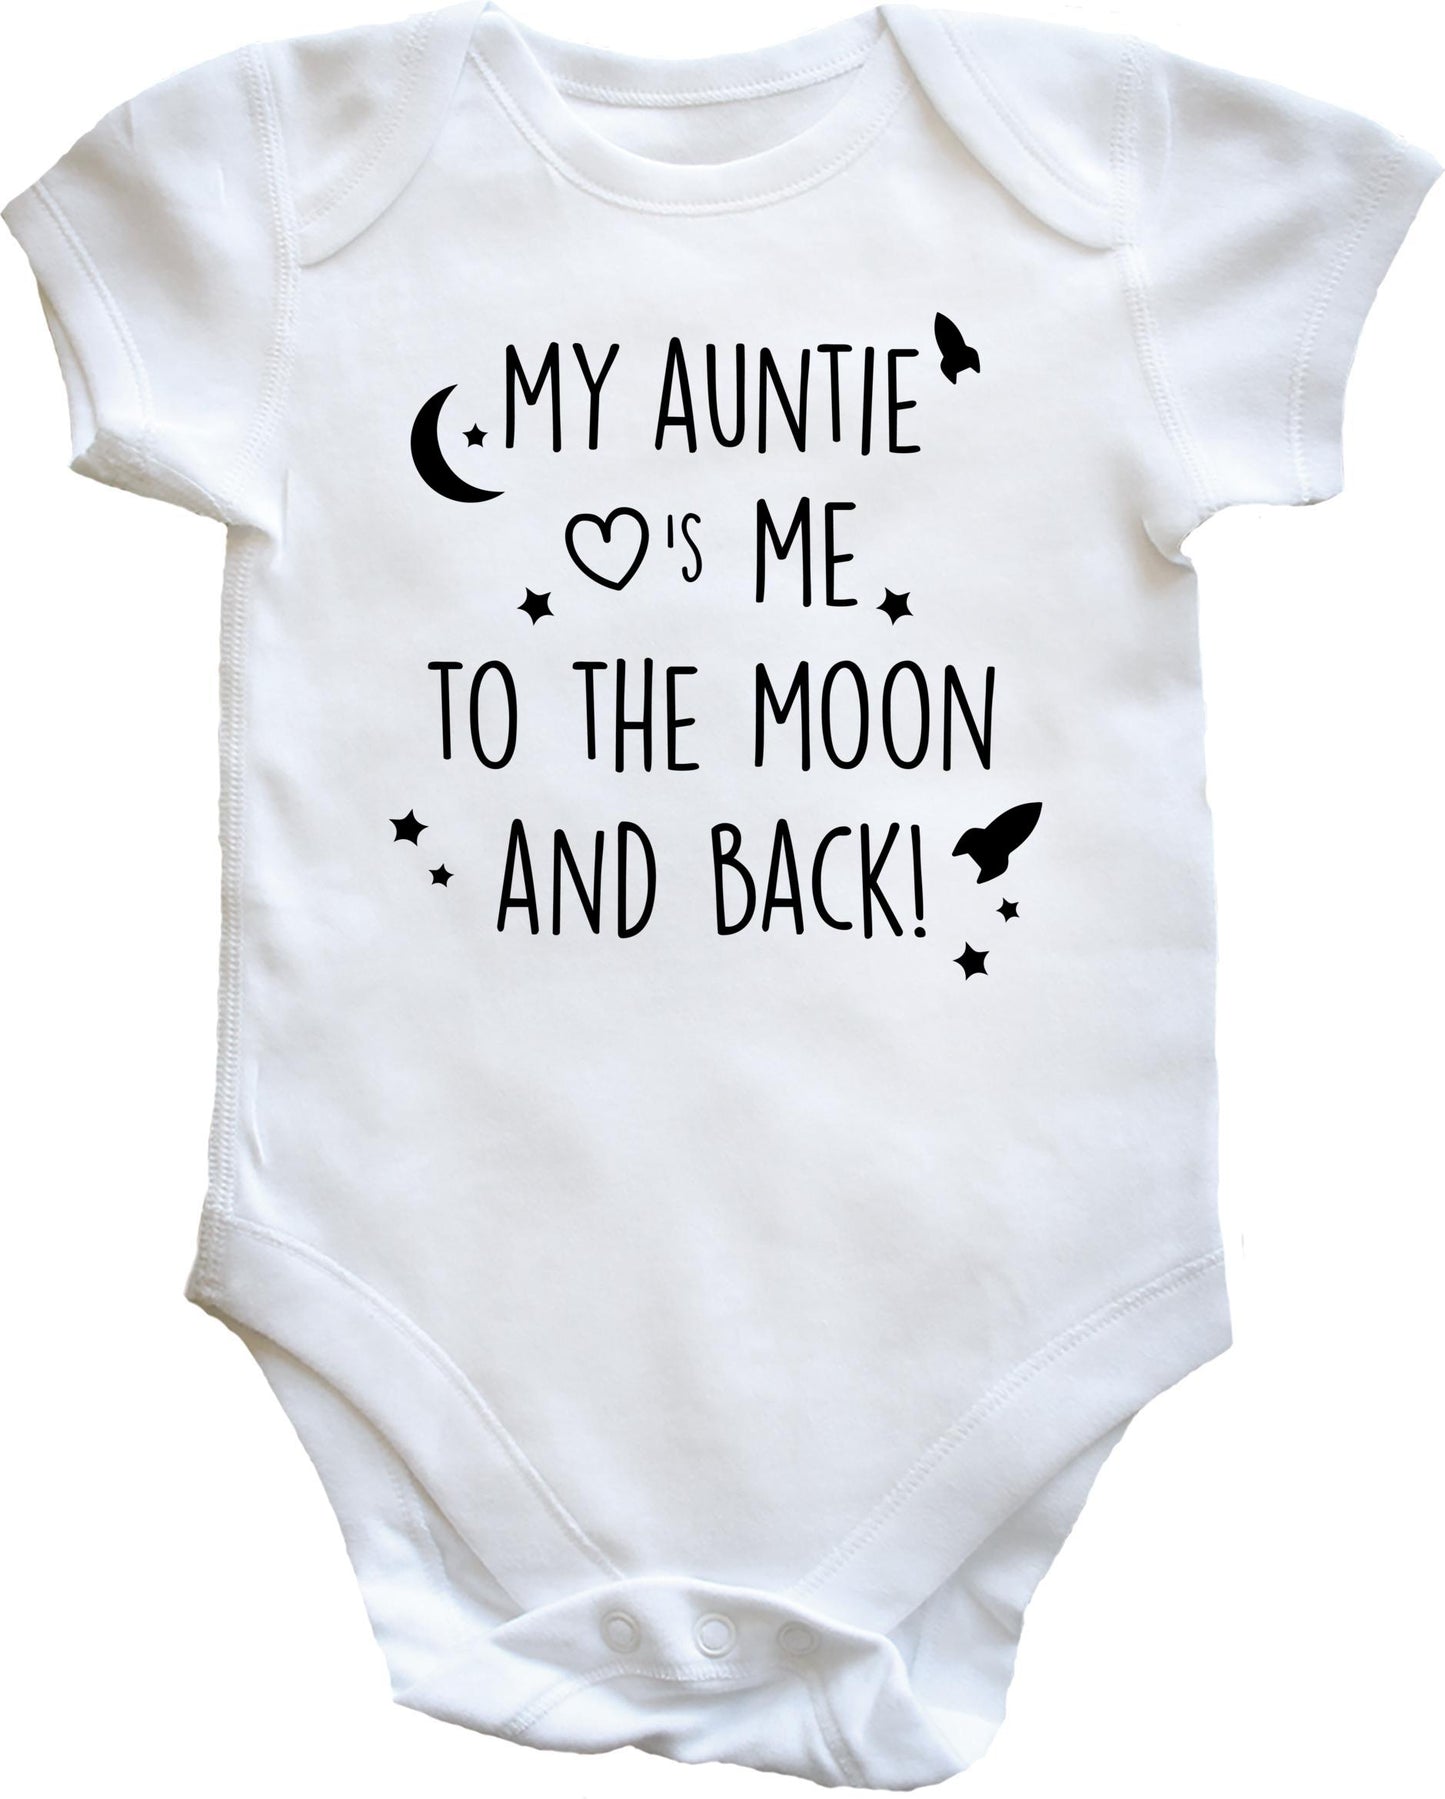 My Auntie Loves Me To The Moon And Back baby vest